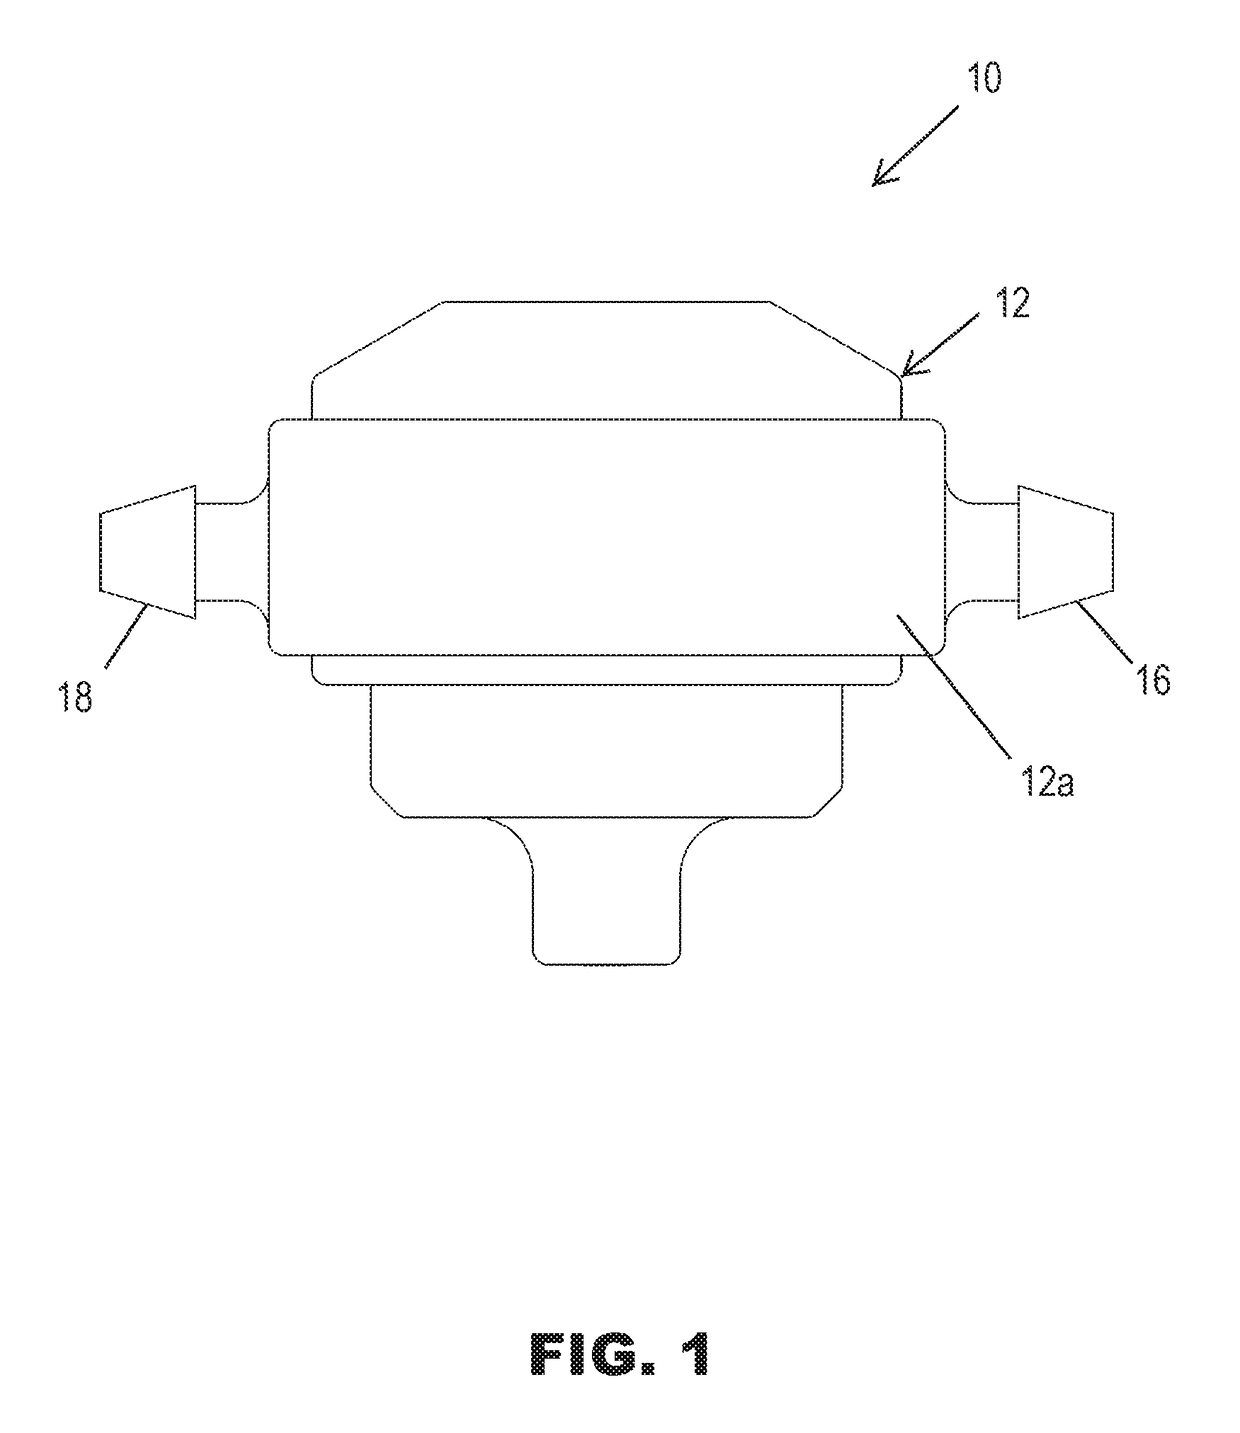 Low flow emitter with exit port closure mechanism for subsurface irrigation